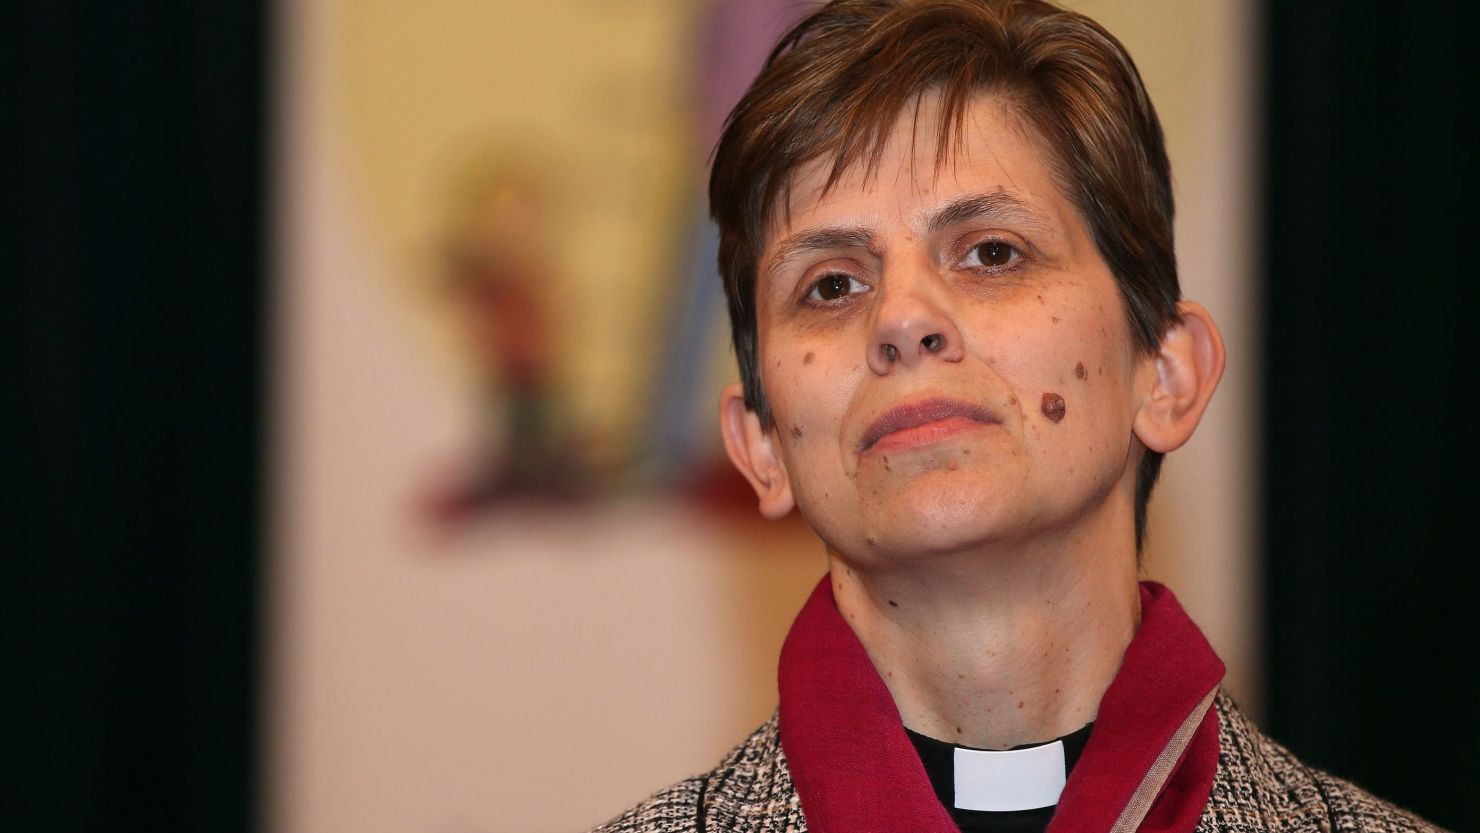 The Church of England announces the Rev. Libby Lane as its first woman bishop Wednesday in Stockport, England.